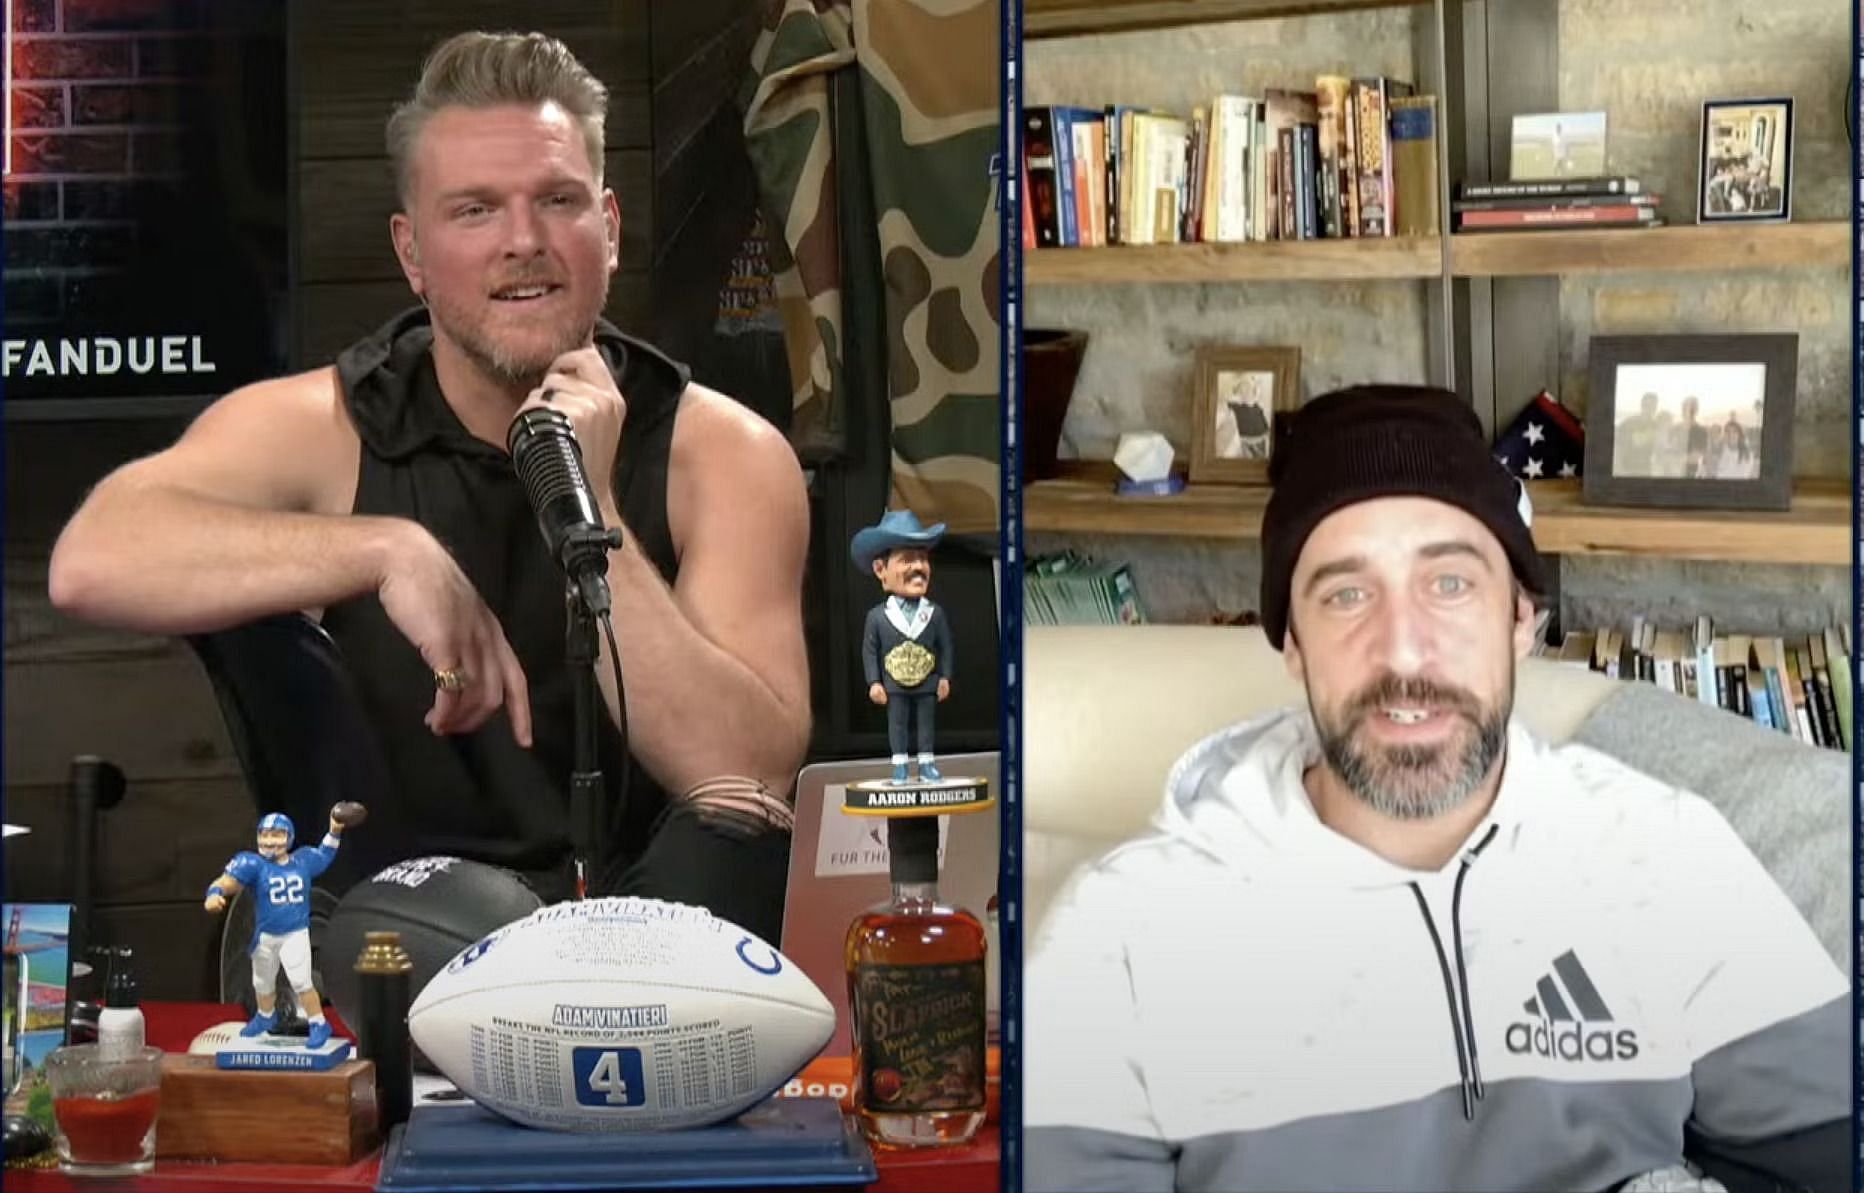 Aaron Rodgers is set to appear on the Pat McAfee Show to discuss his Jets future